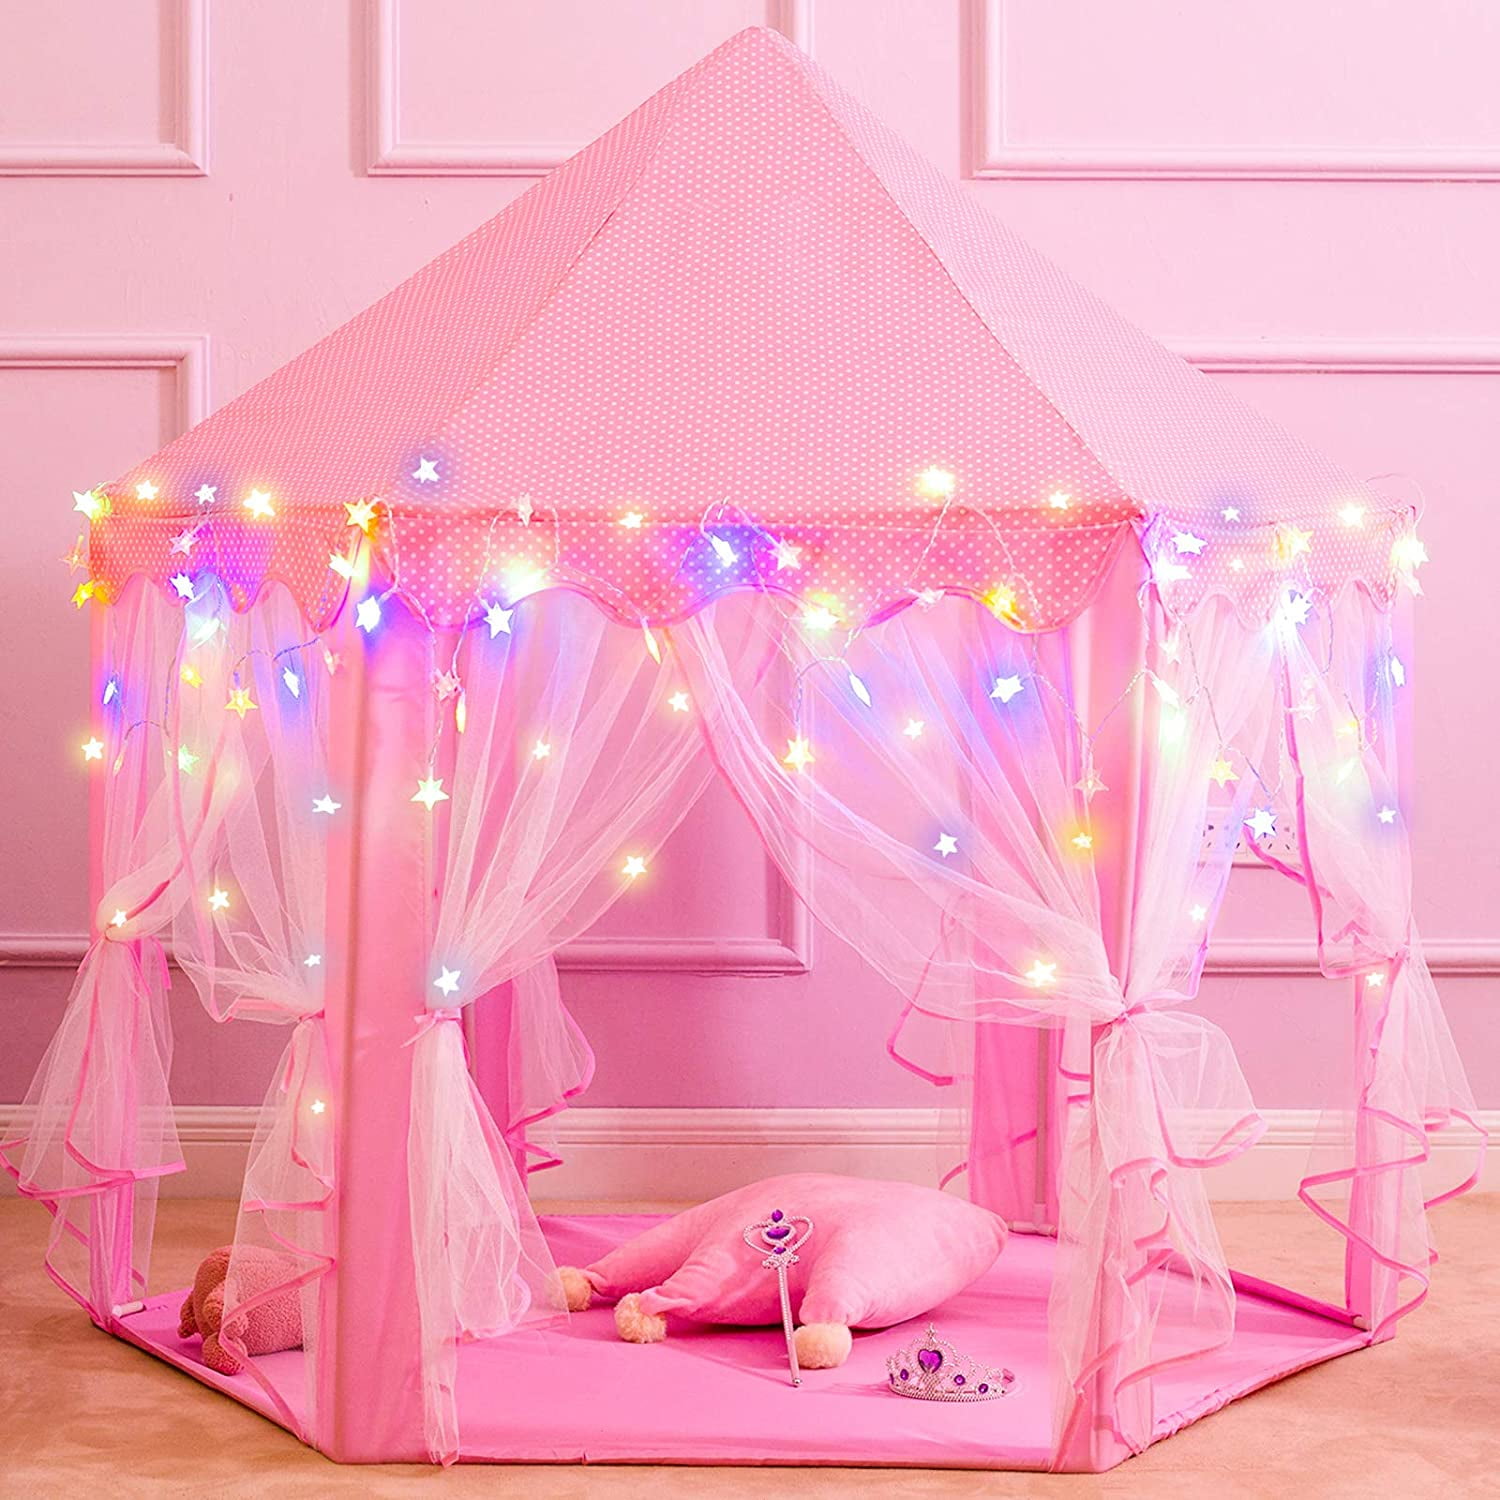 Large Princess Pink Play House Tent Dome Indoor/Outdoor Children Kids Play Tents 